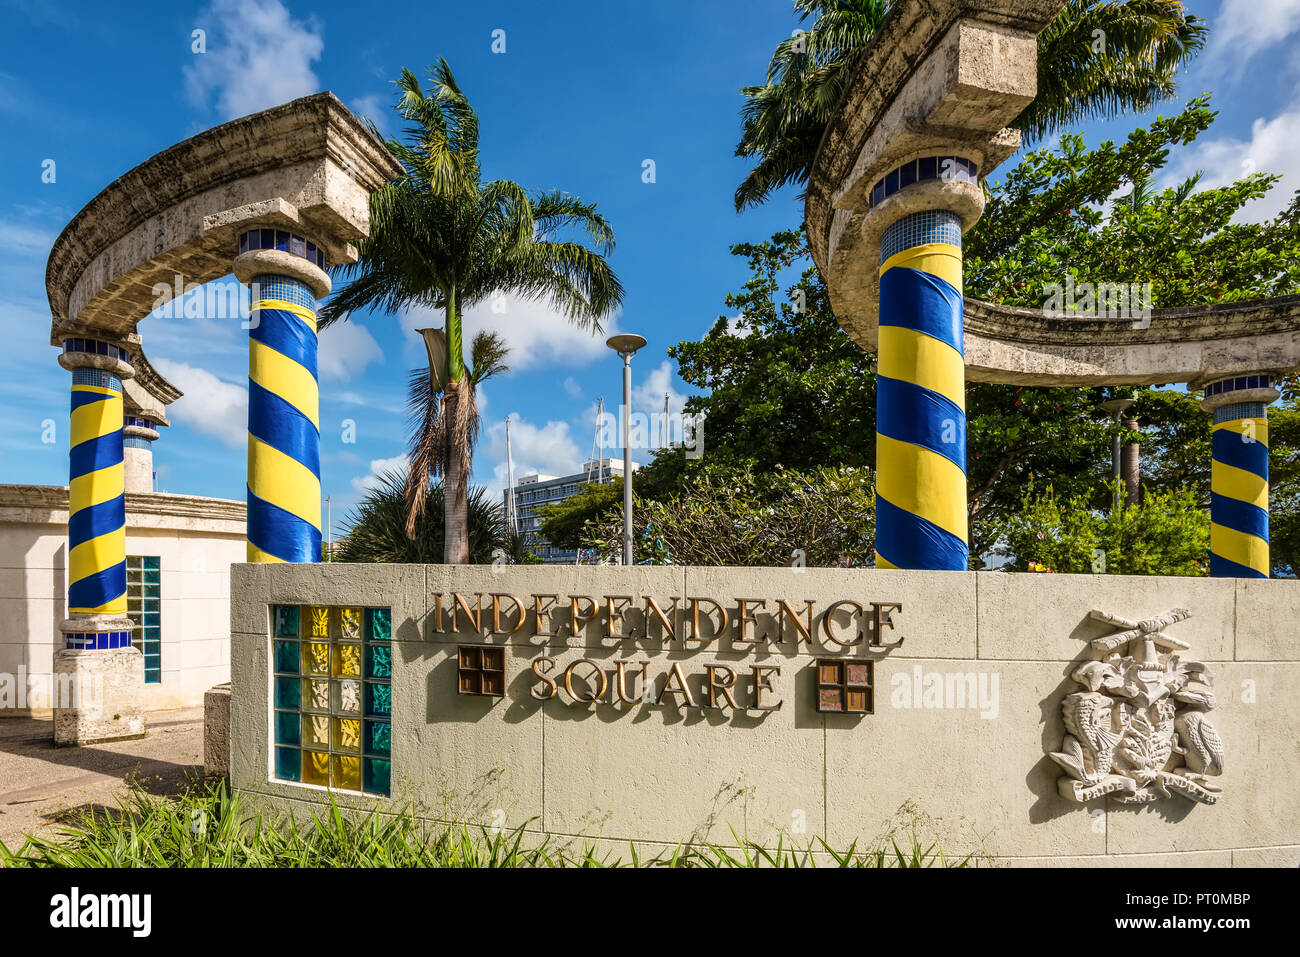 Bridgetown, Barbados - December 18, 2016: The columns are wrapped in the colors of the national flag in Fountain Independence Square of Bridgetown, Ba Stock Photo